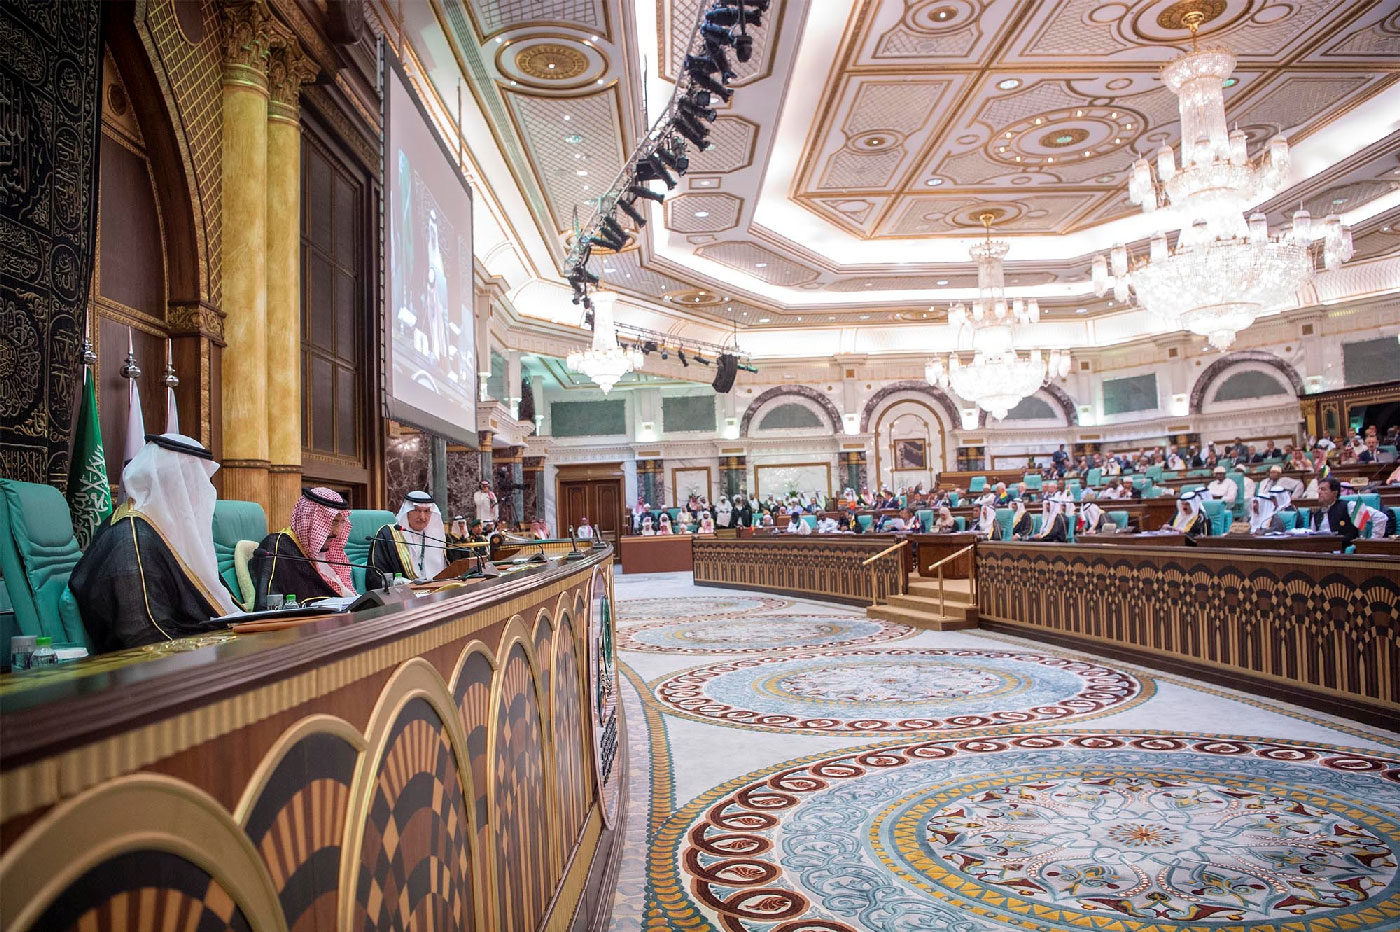 General view of the Arab leaders during the 14th Islamic summit of the Organisation of Islamic Cooperation (OIC) in Mecca